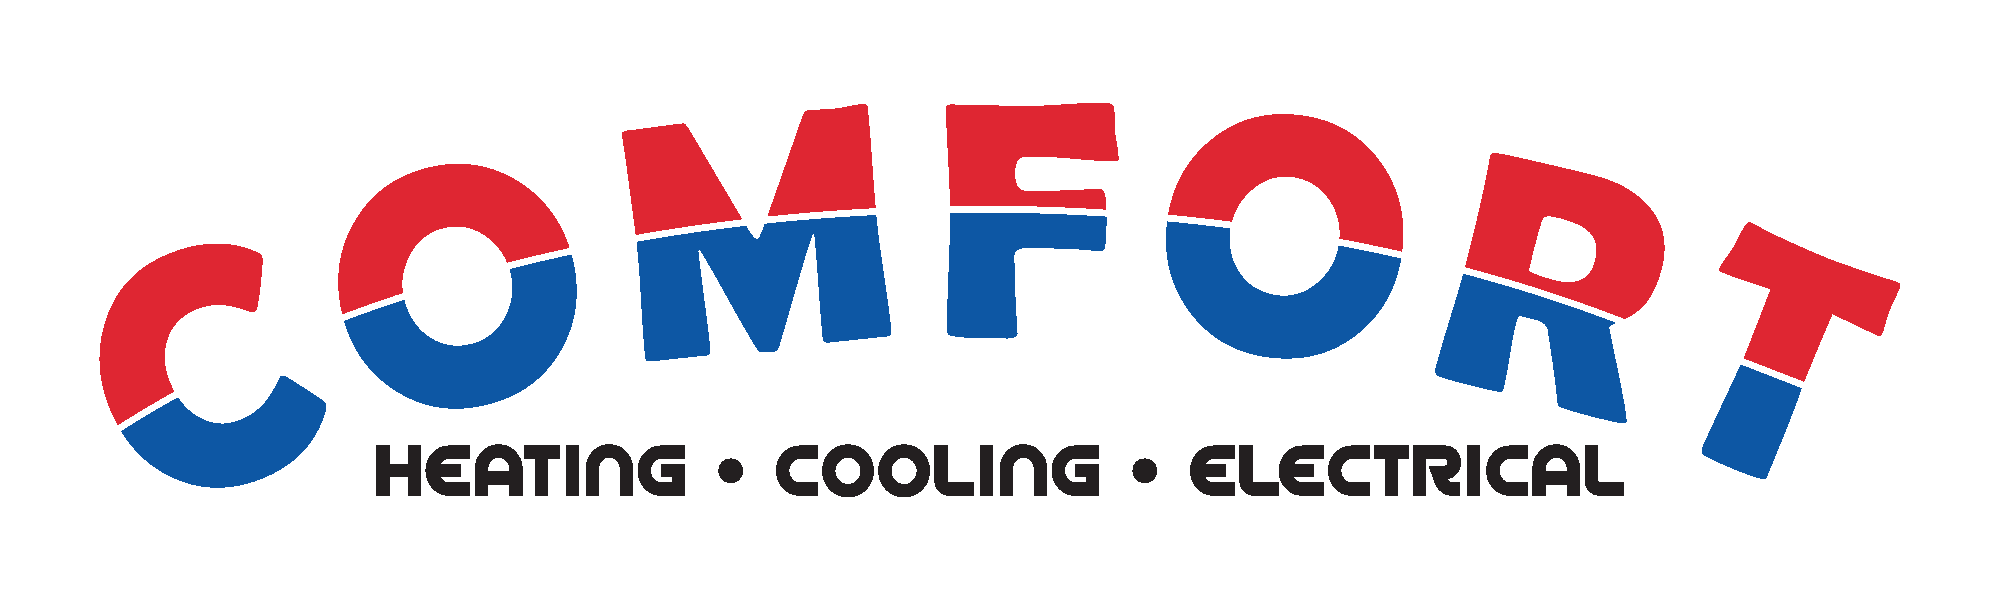 Comfort Heating and Cooling and Electrical Post Falls Coeur d'Alene, ID